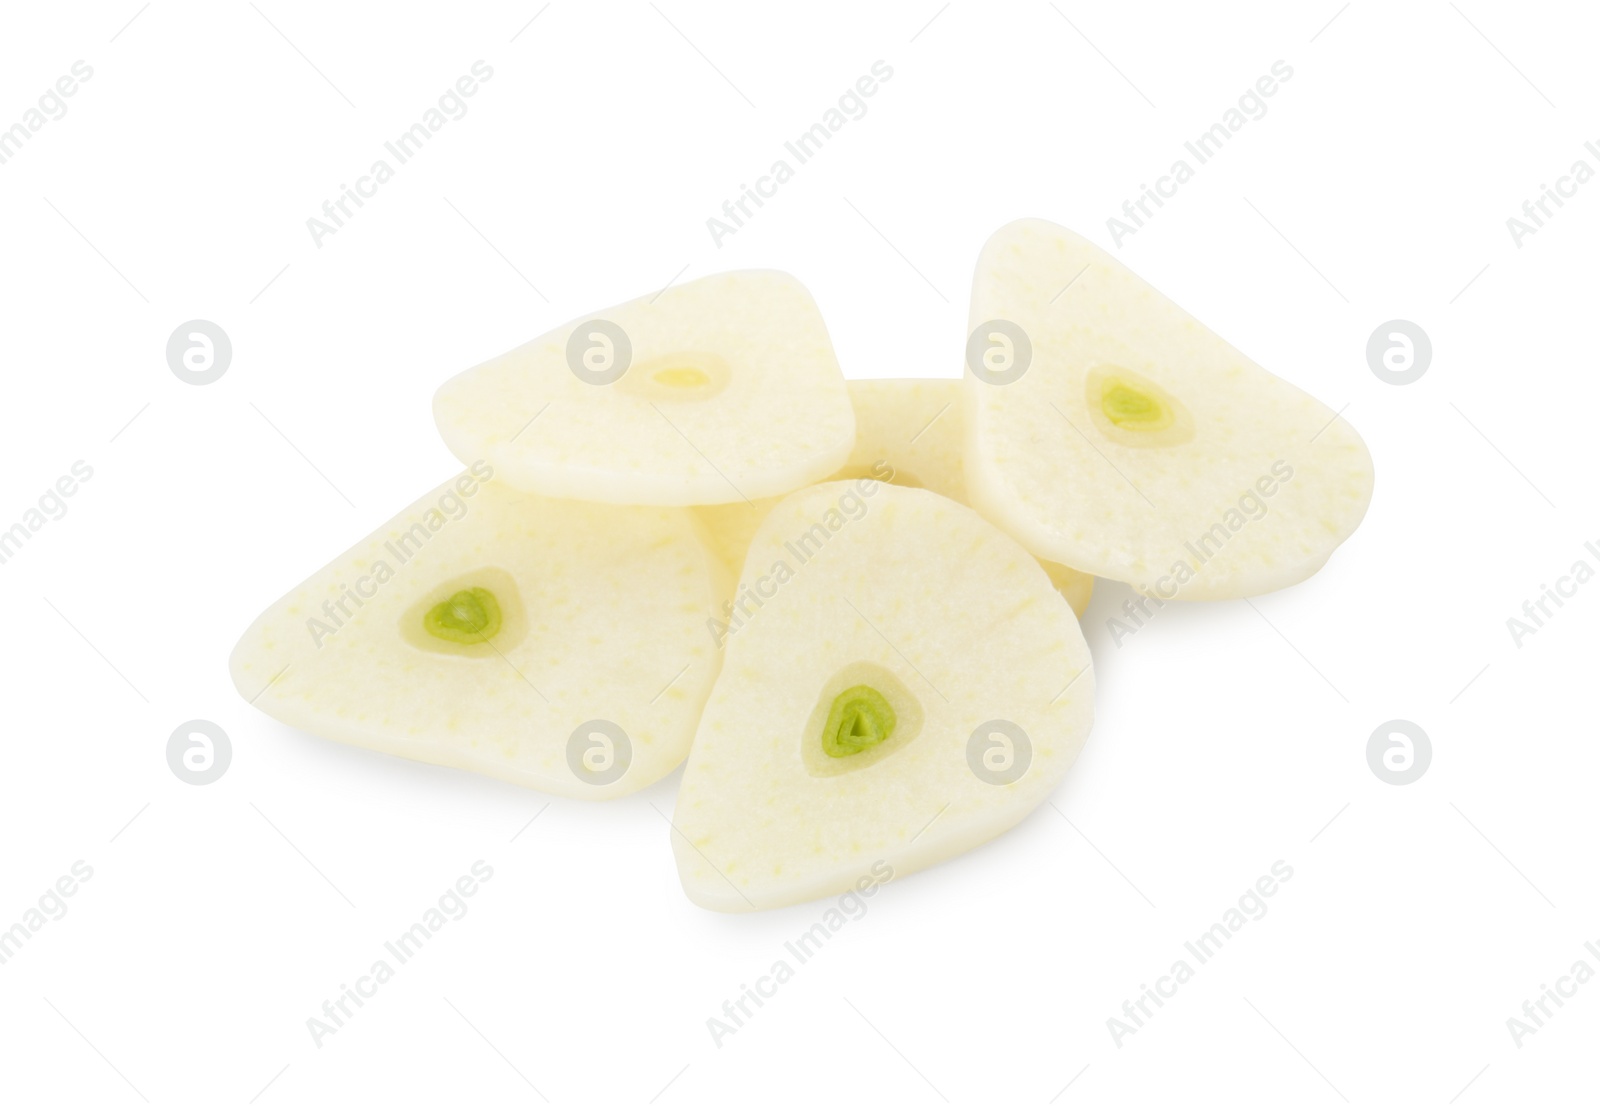 Photo of Pieces of fresh garlic isolated on white